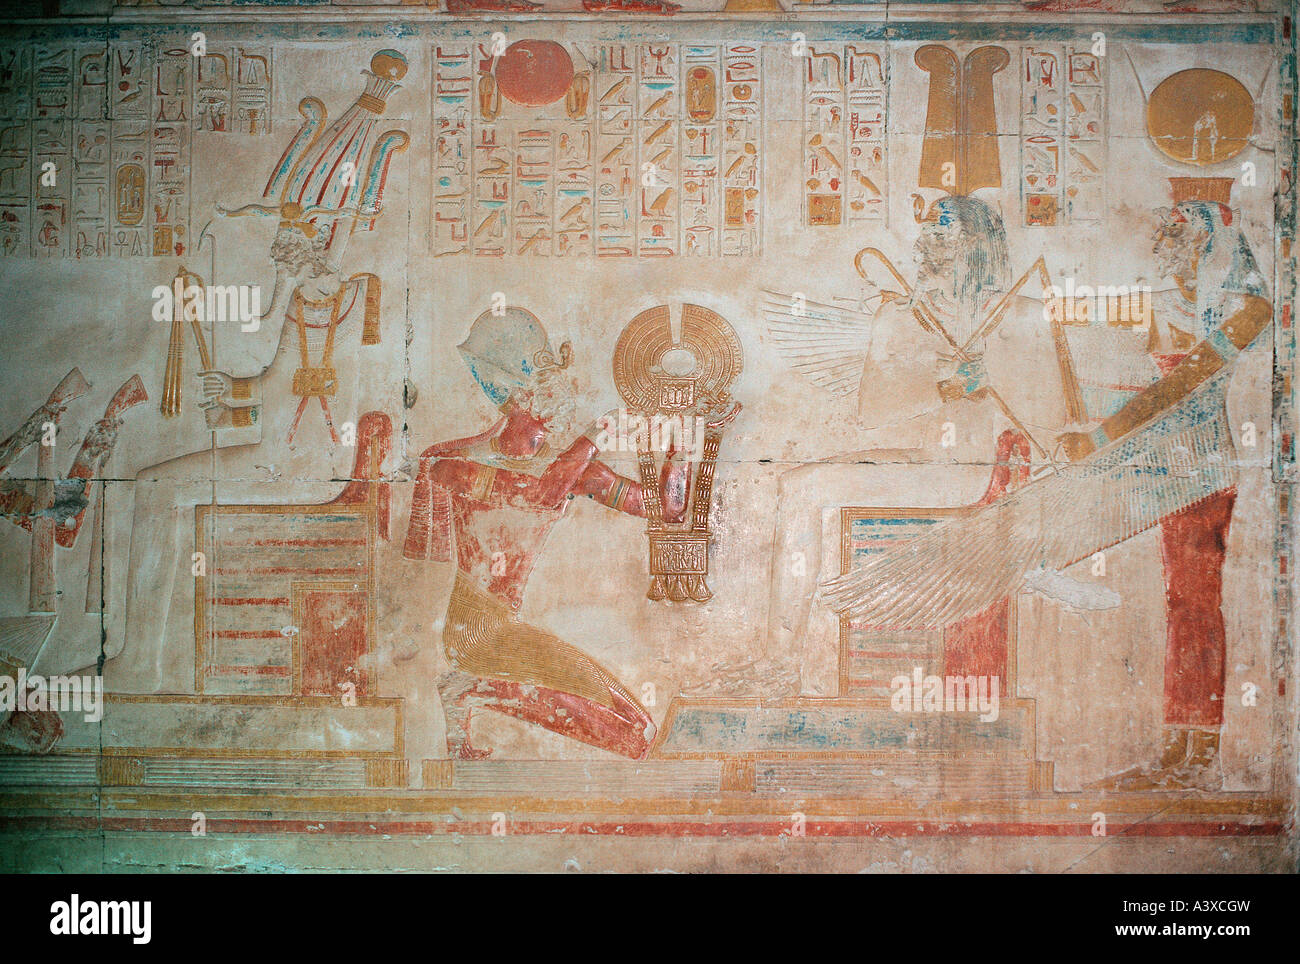 Details of reliefs inside the Temple of Abydos in Egypt Stock Photo